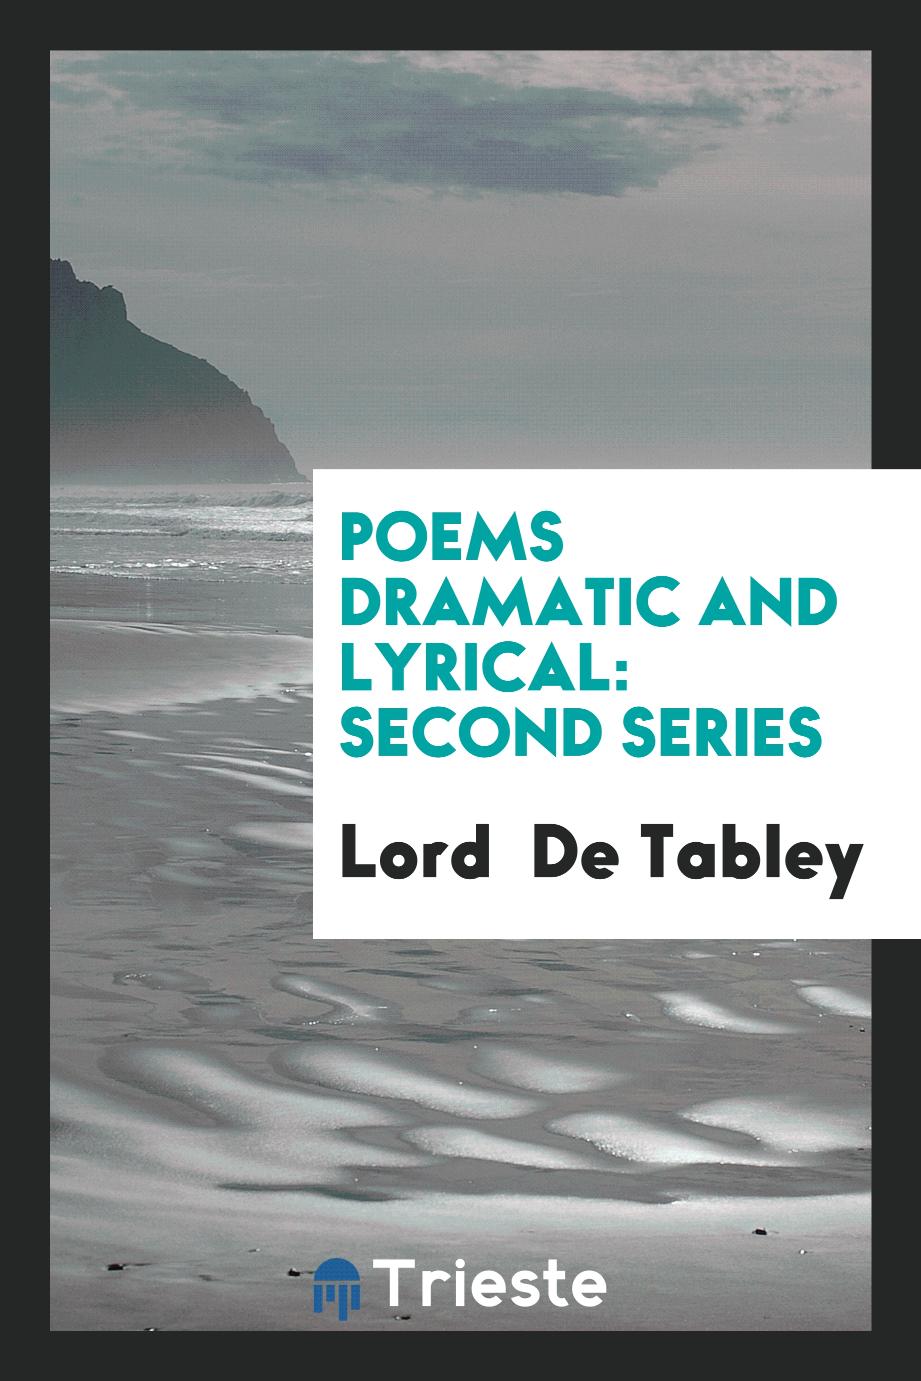 Poems Dramatic and Lyrical: Second Series